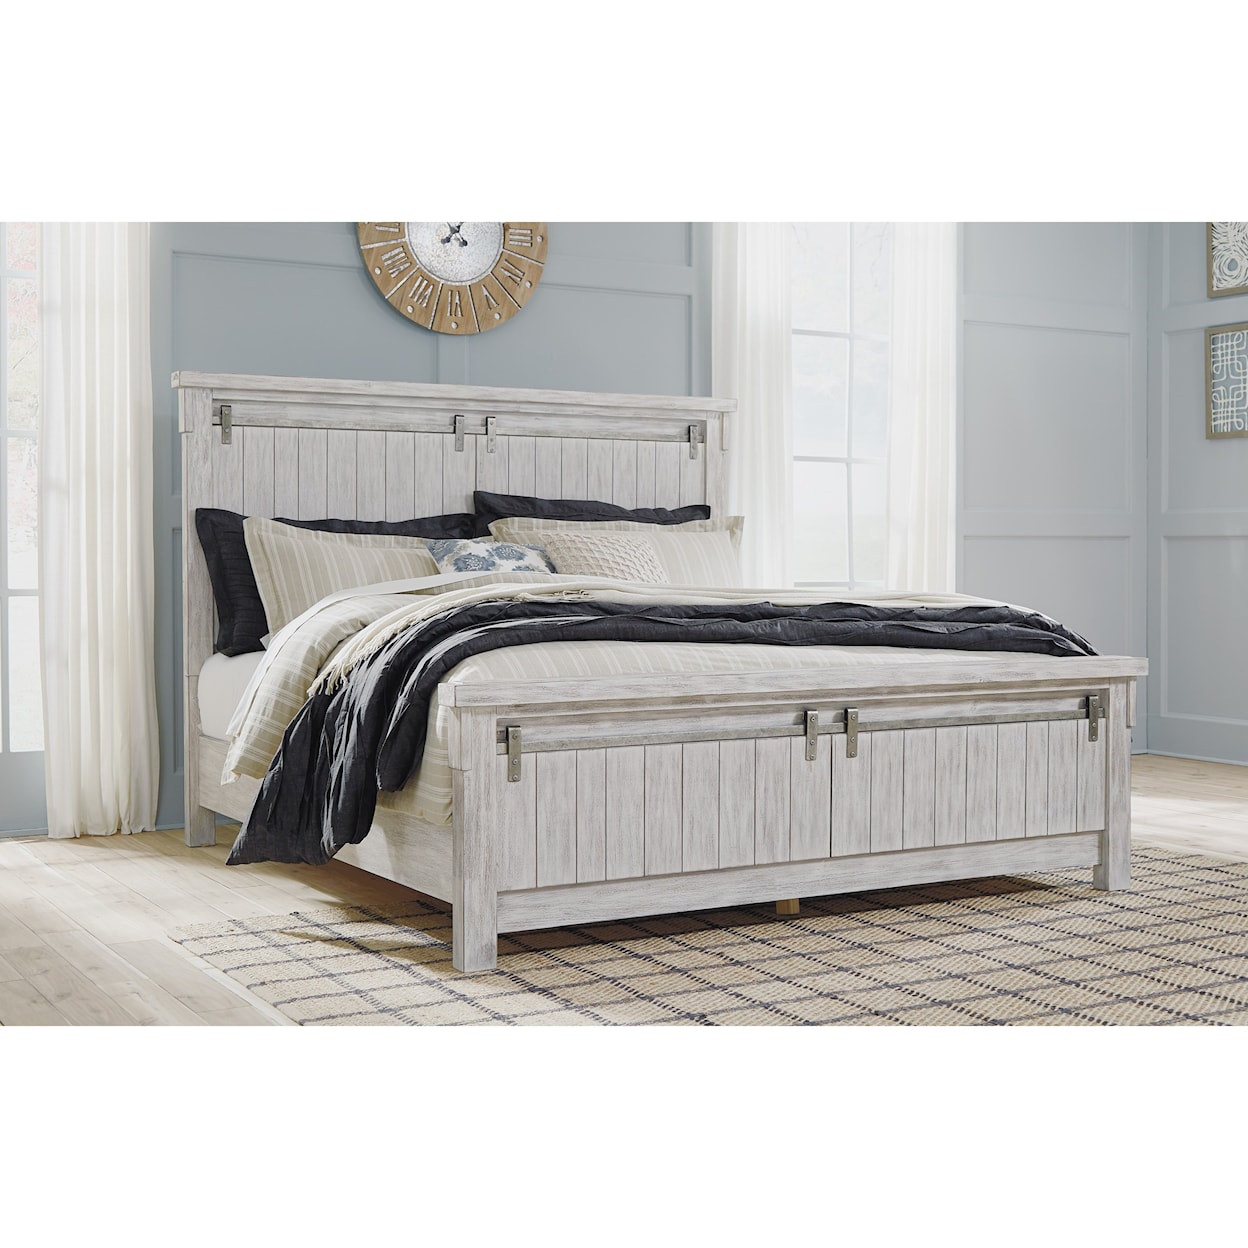 Signature Design by Ashley Brashland Queen Panel Bed